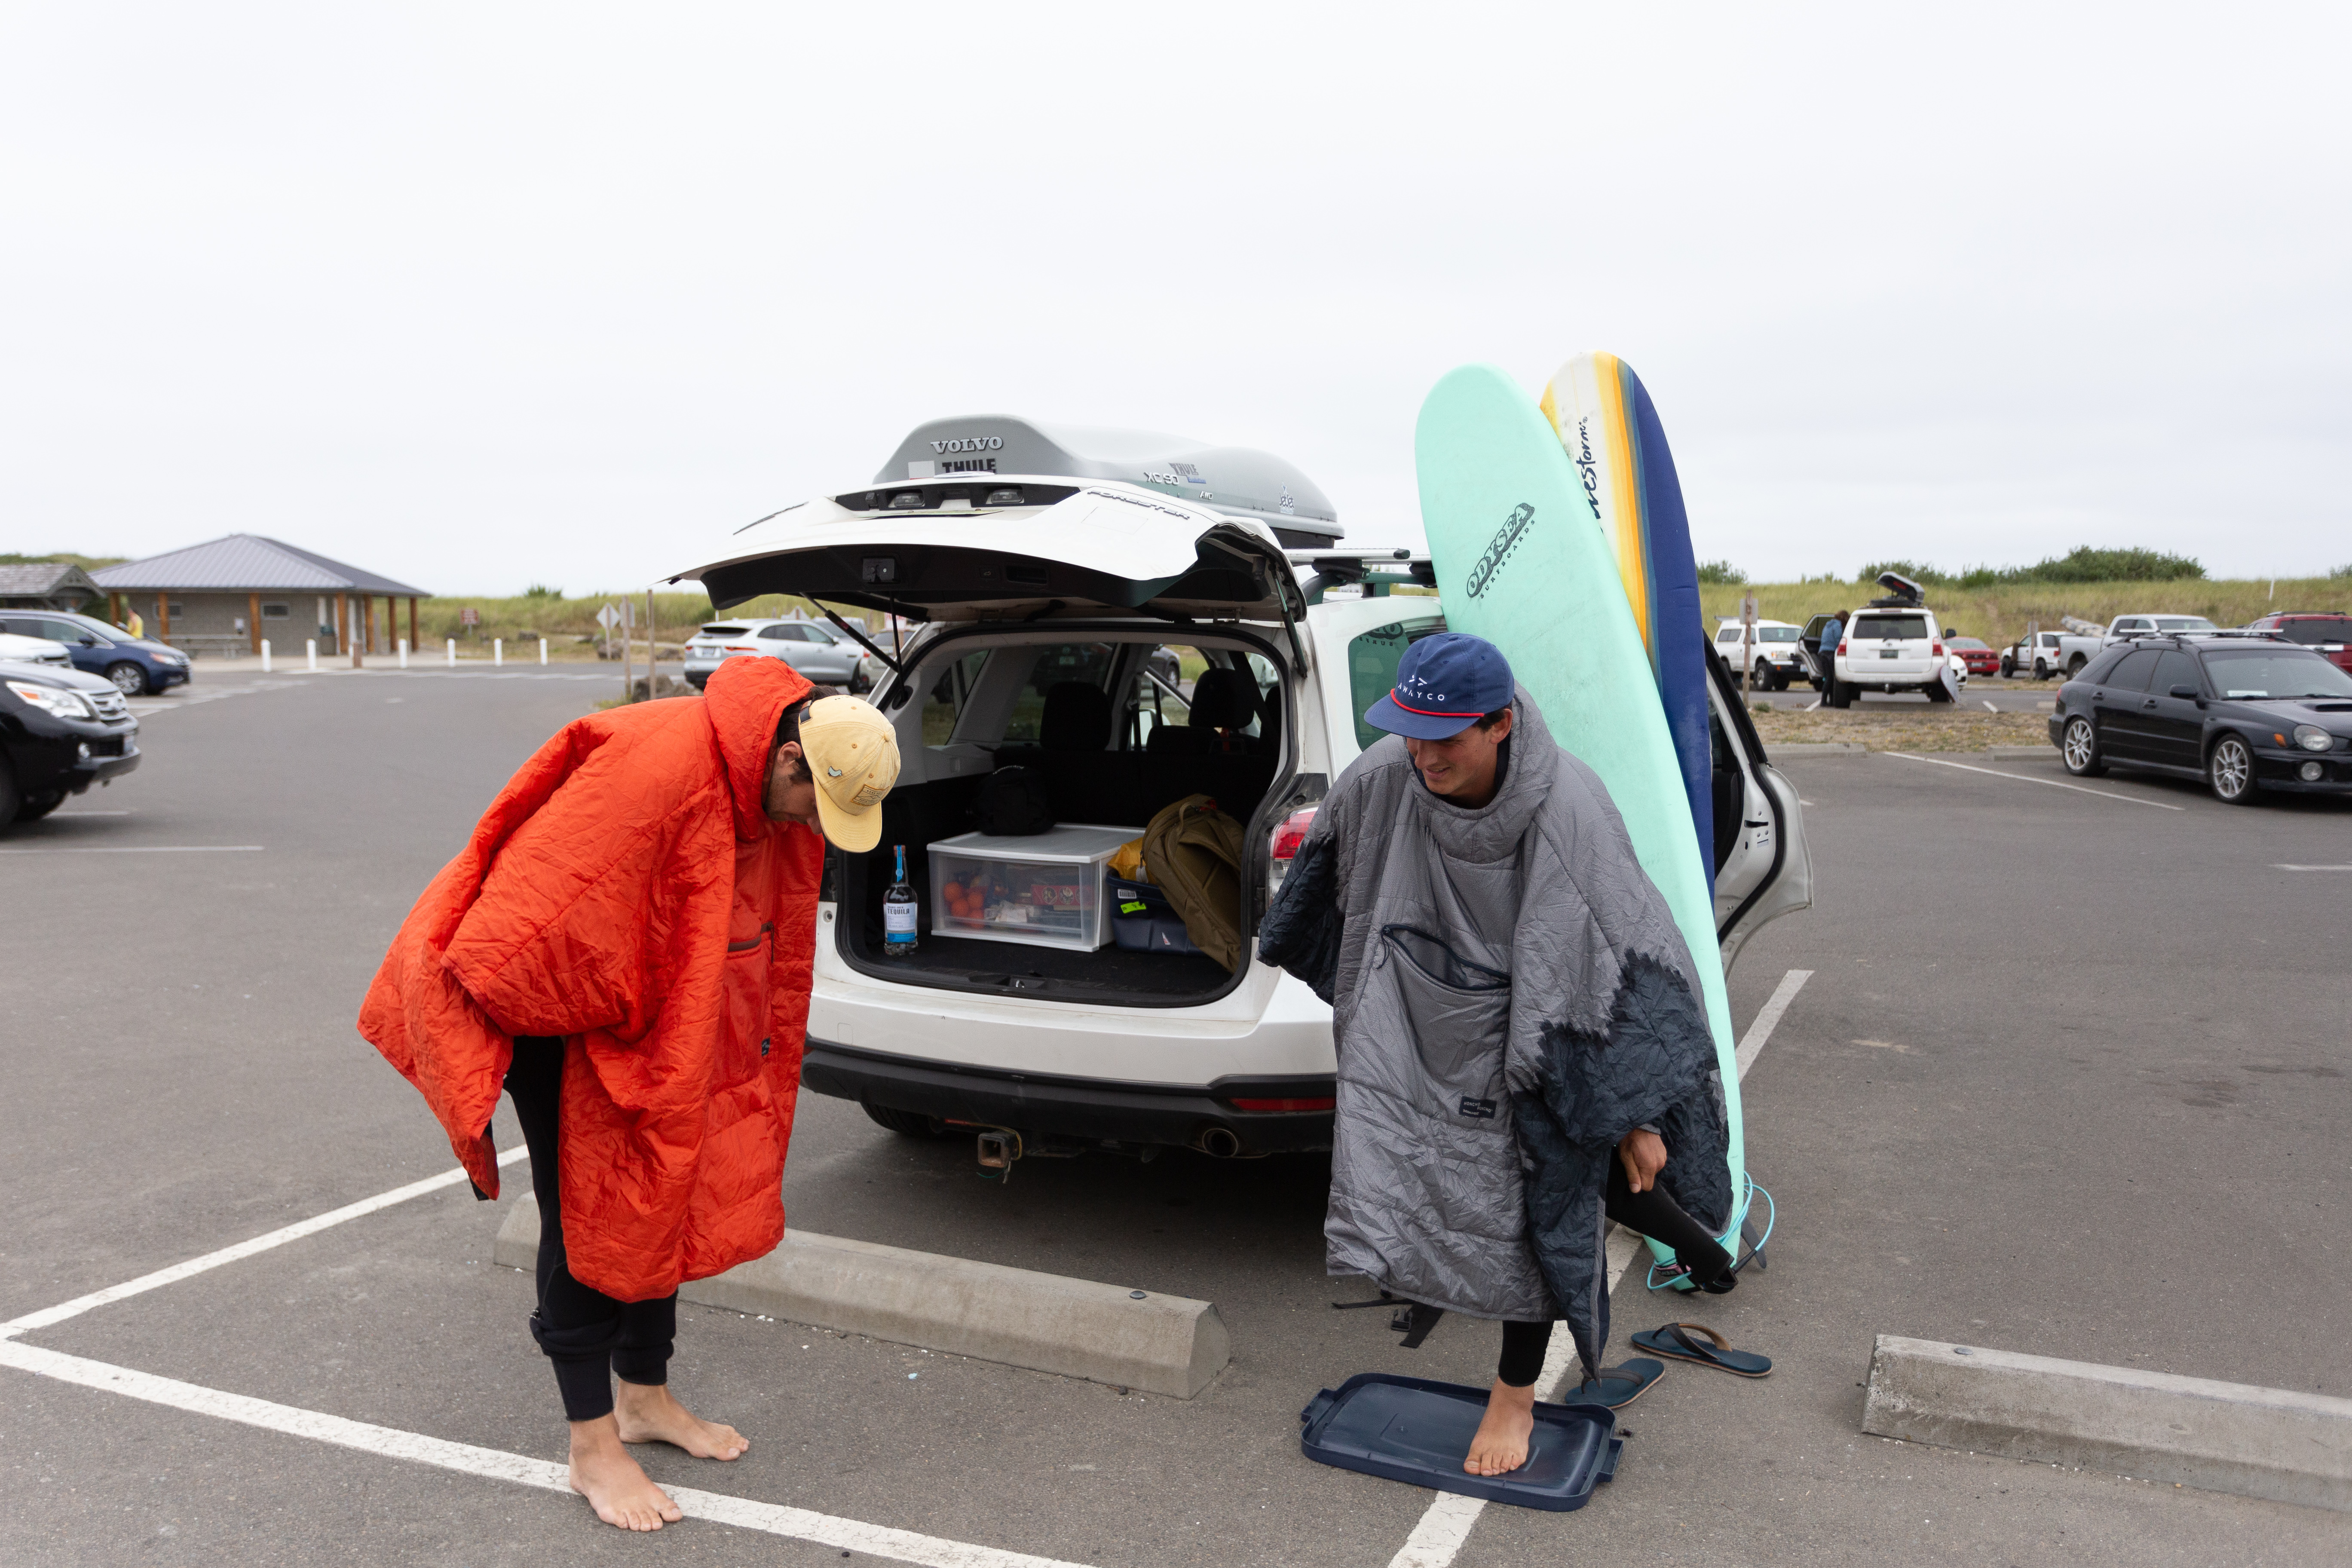 Changing into wetsuit with a honcho poncho